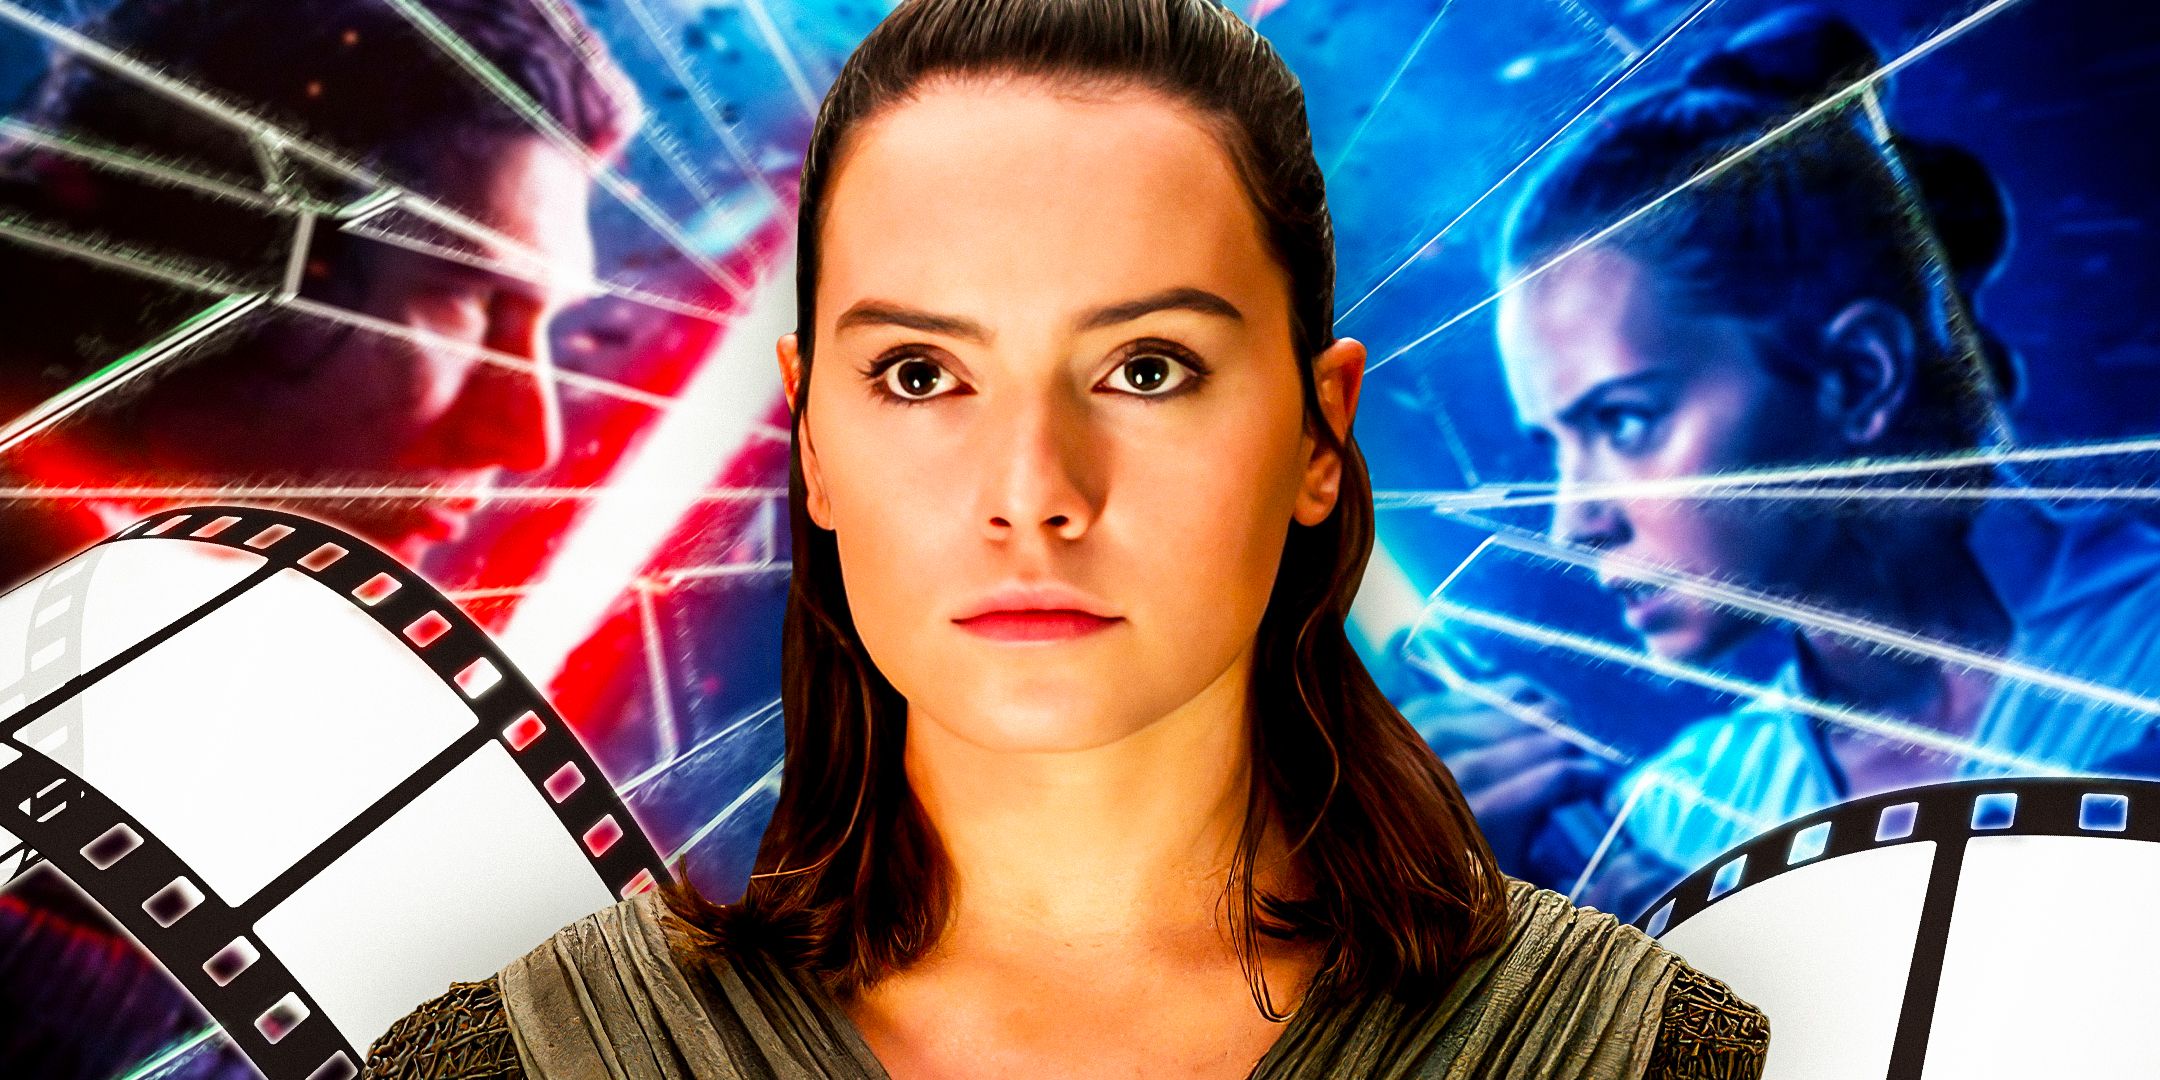 Daisy-Ridley-as-Rey-from-Star-Wars-Episode-VIII---The-Last-Jedi